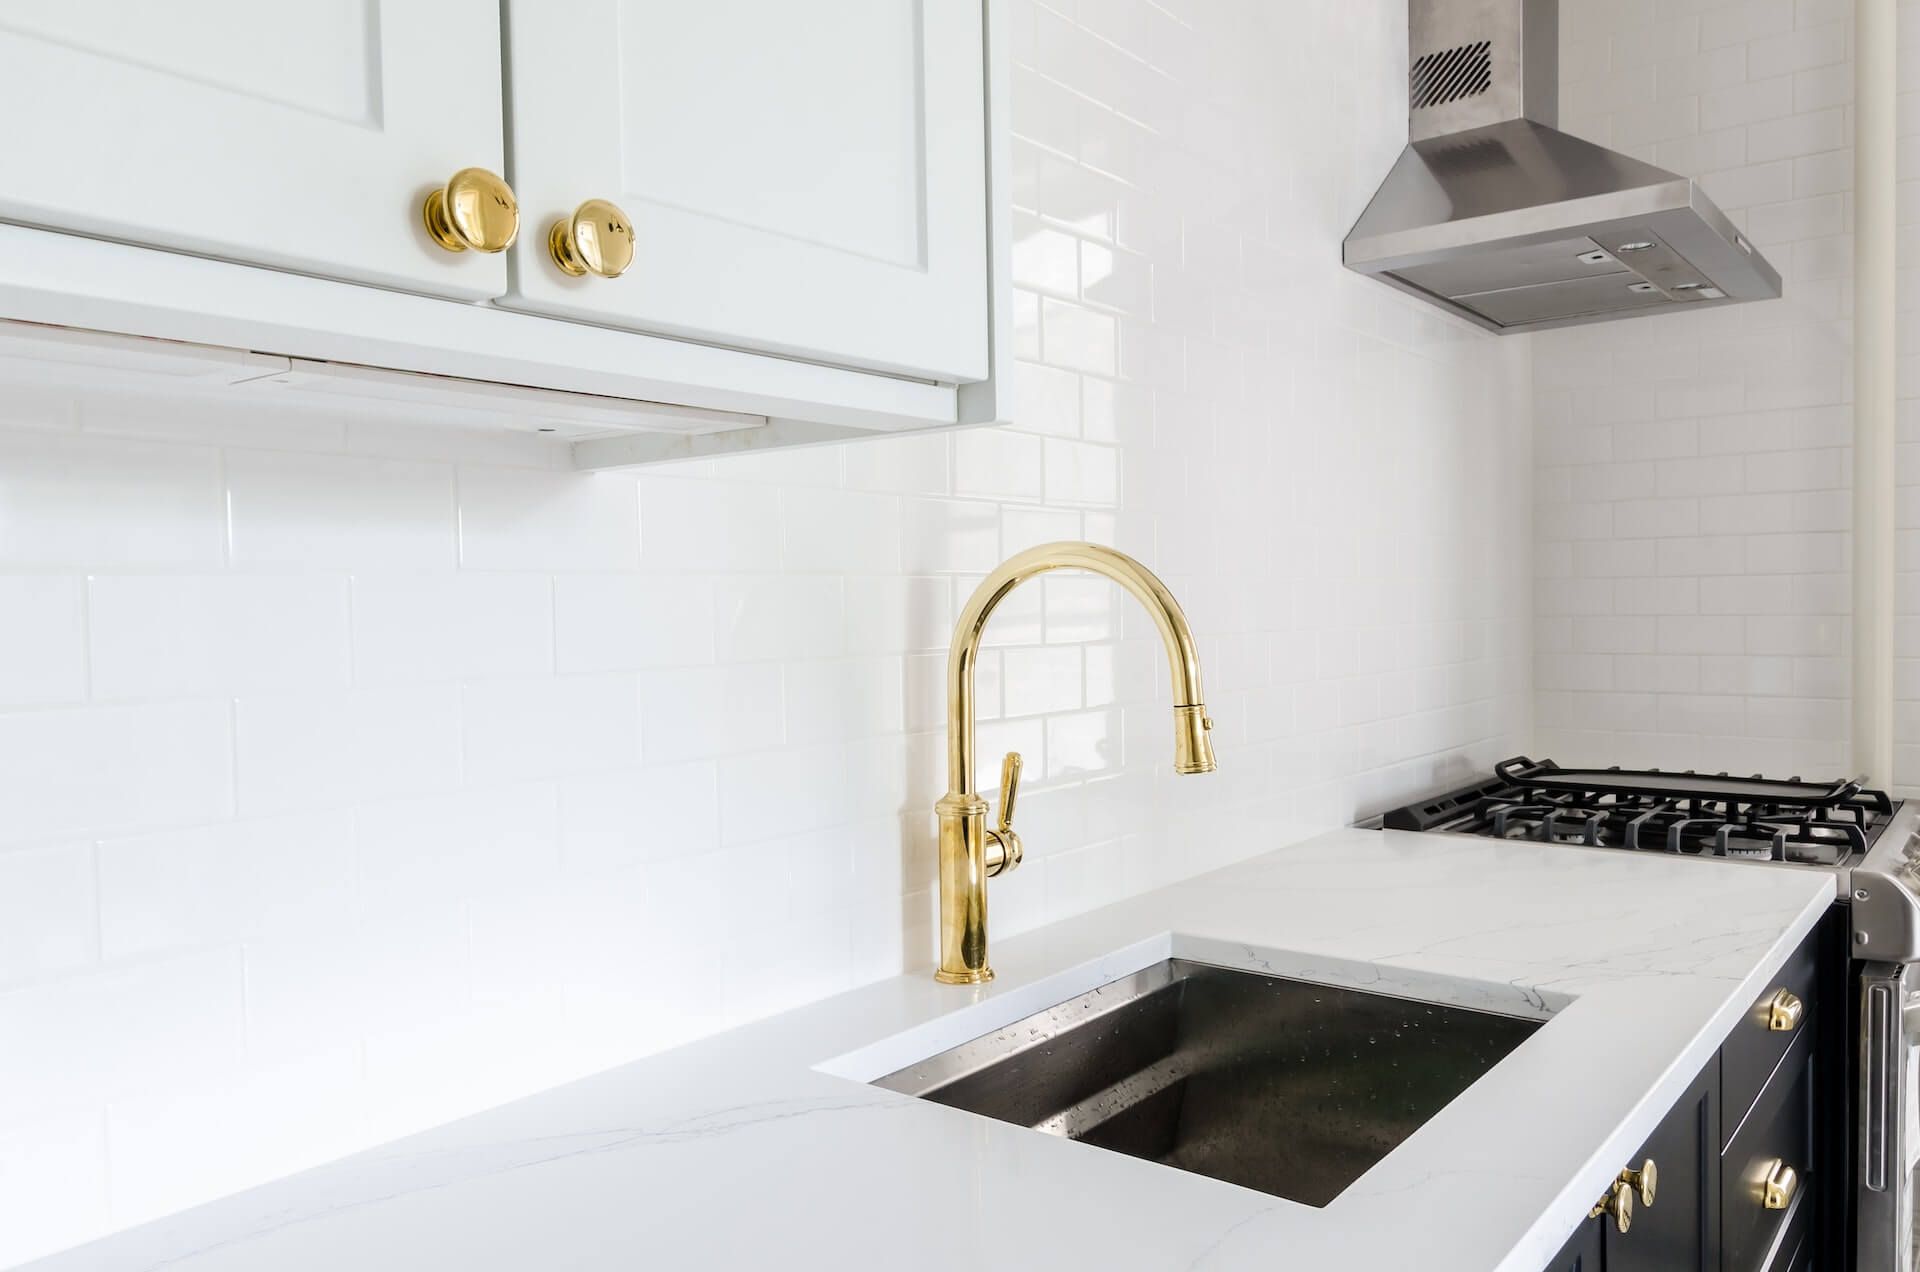 Find out if your kitchen faucet should match your cabinet hardware